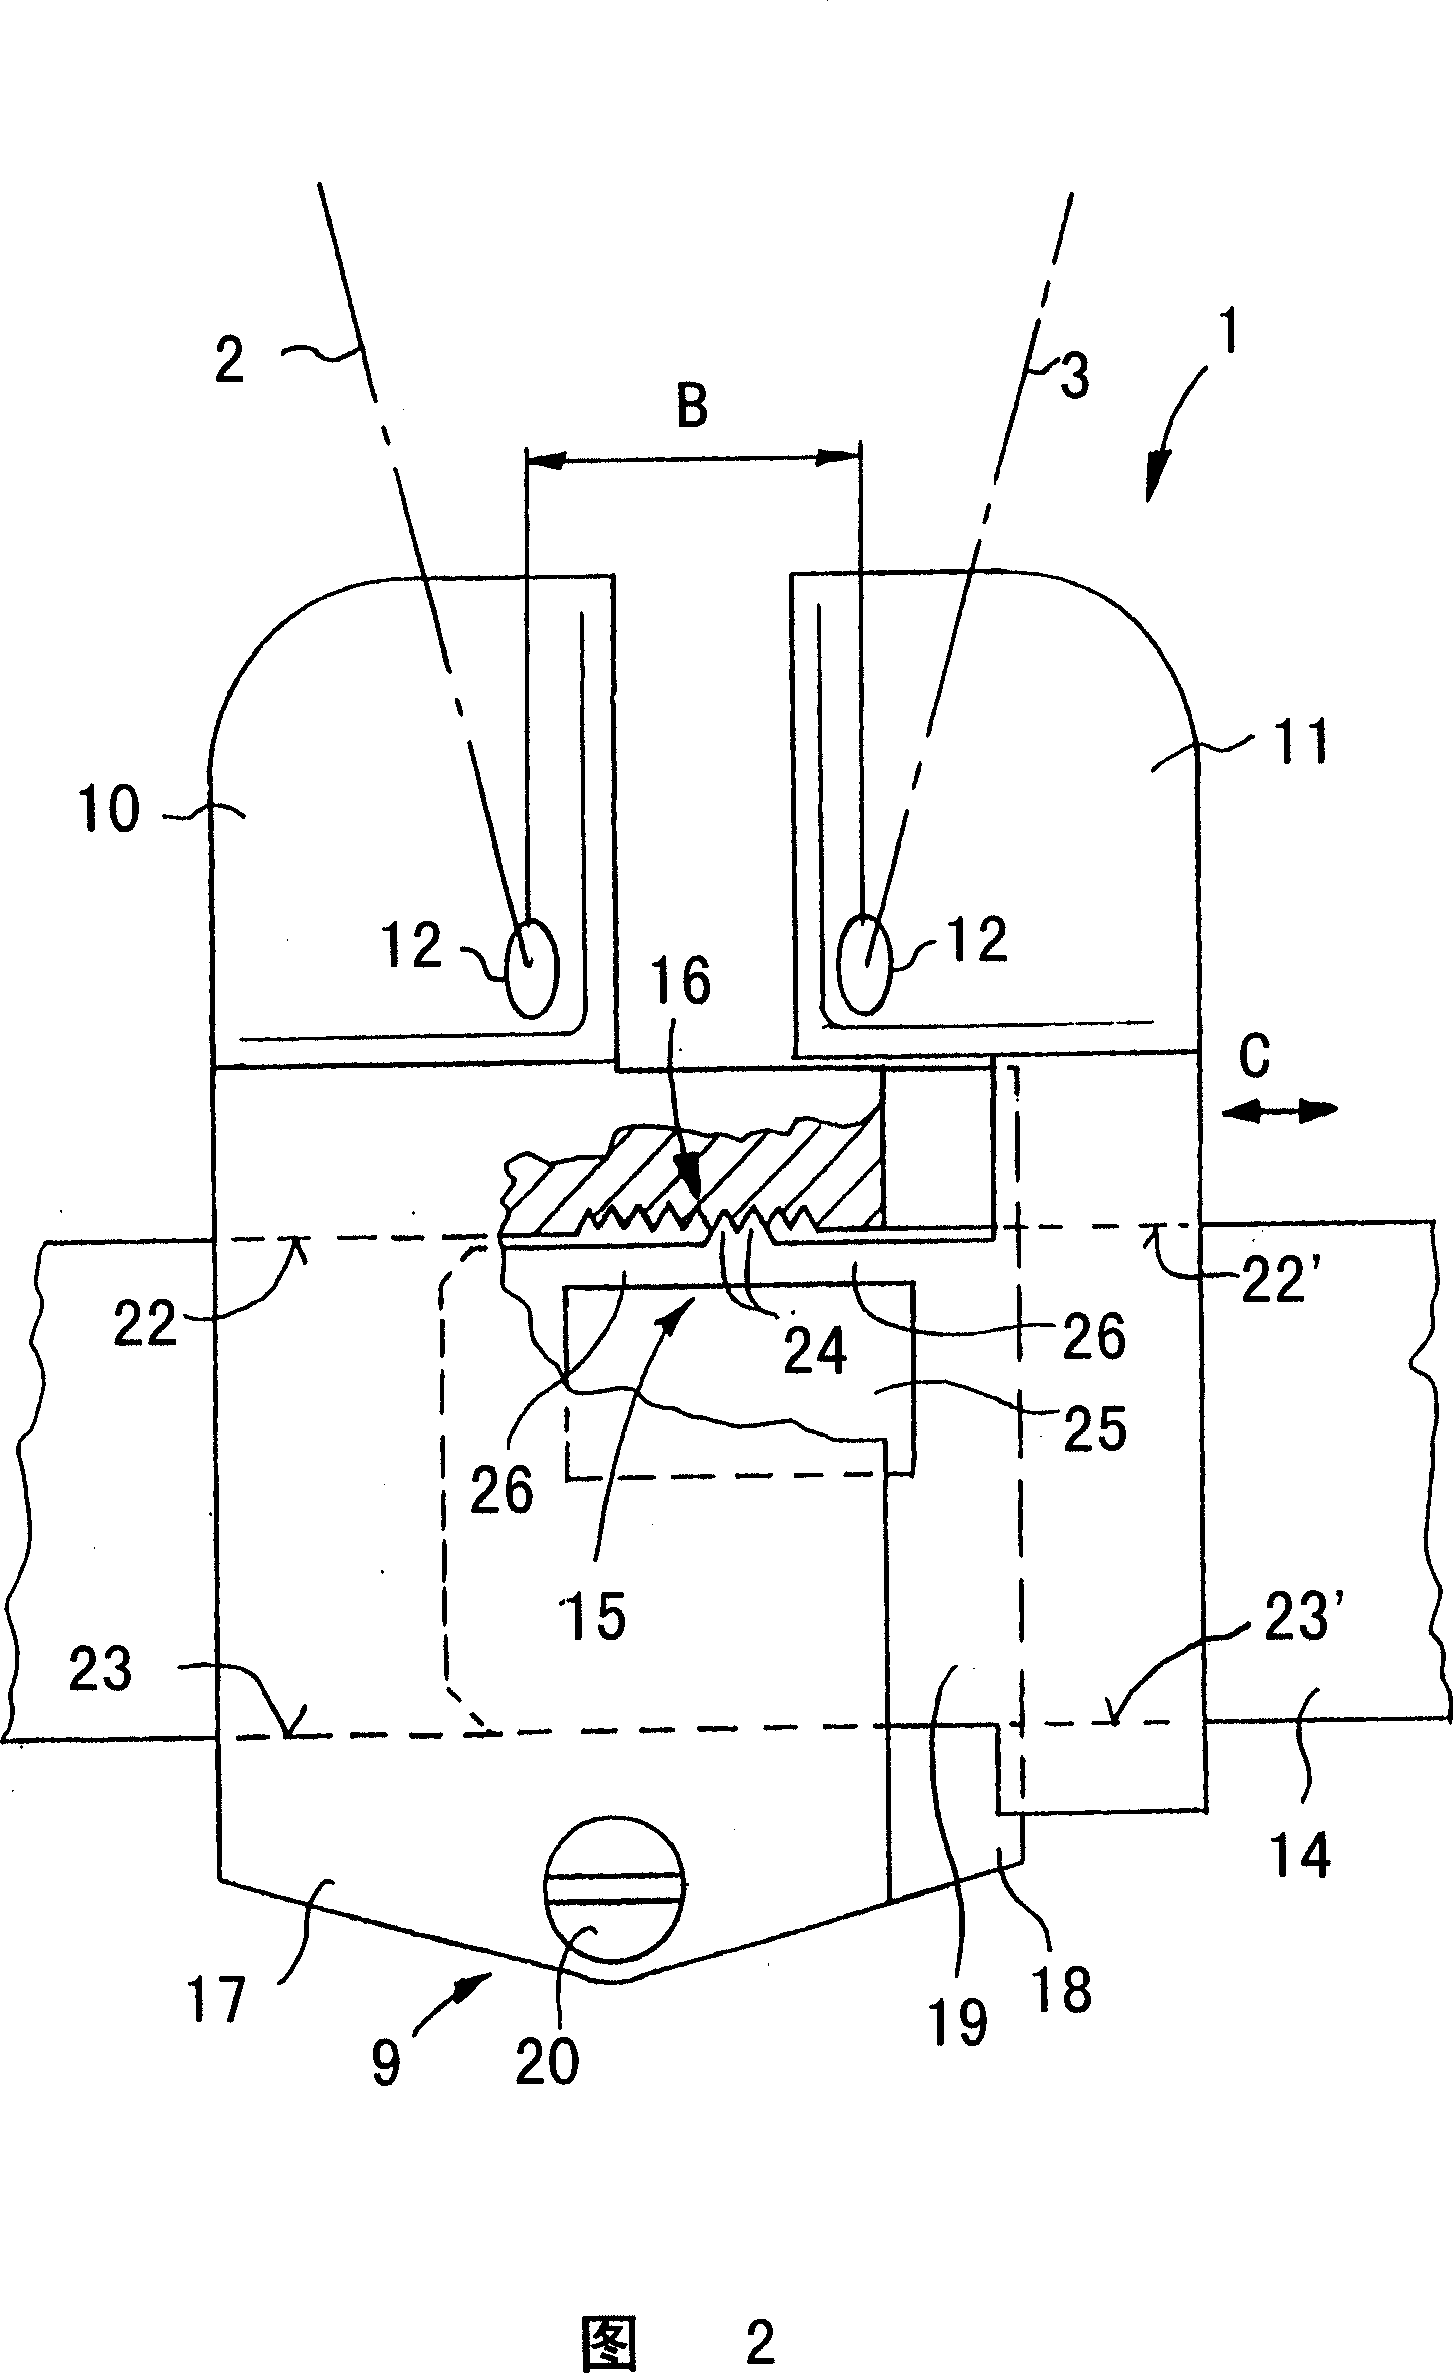 Dual-roving yarn guide for drafting device of weaving machine